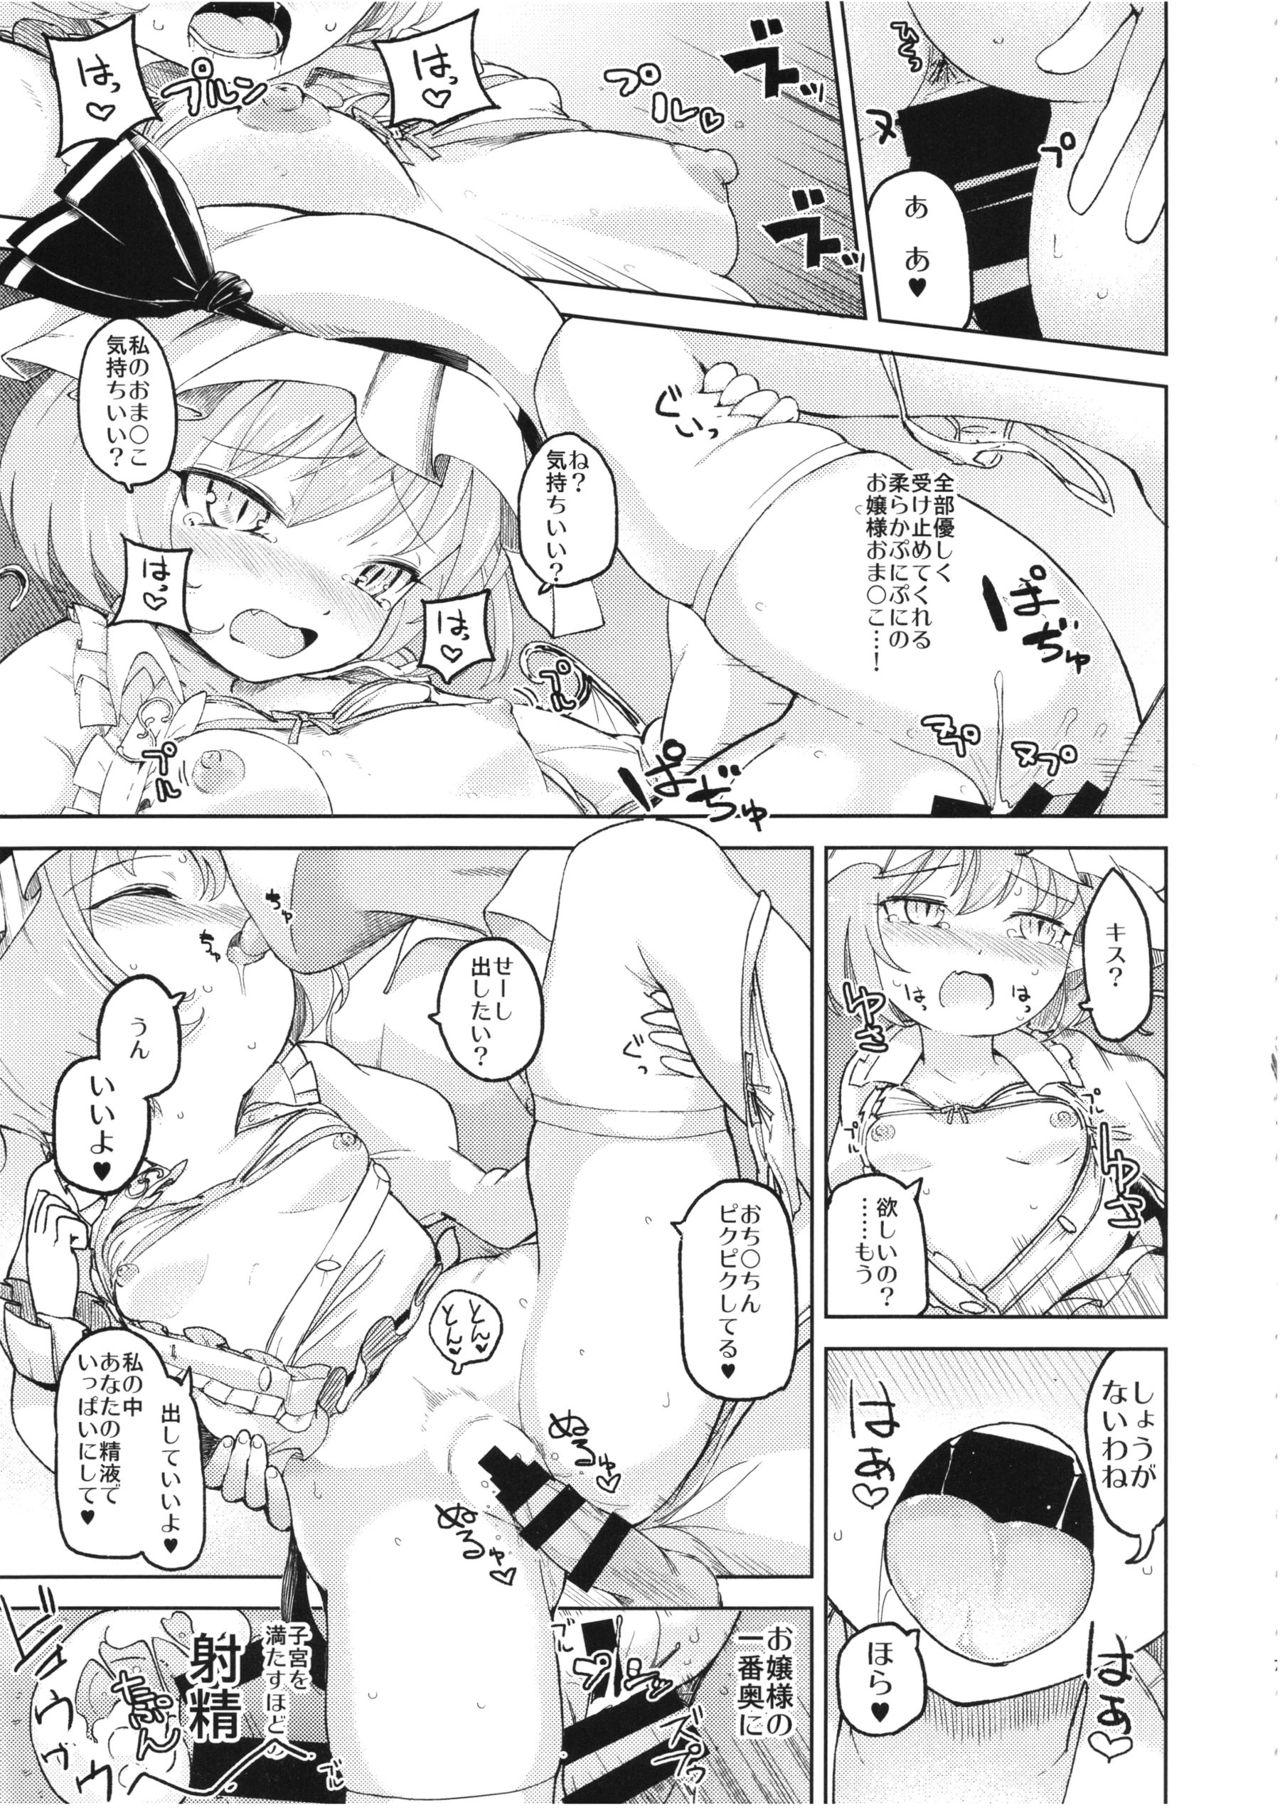 Flexible Aisare Scarlet - Touhou project Teenxxx - Page 7